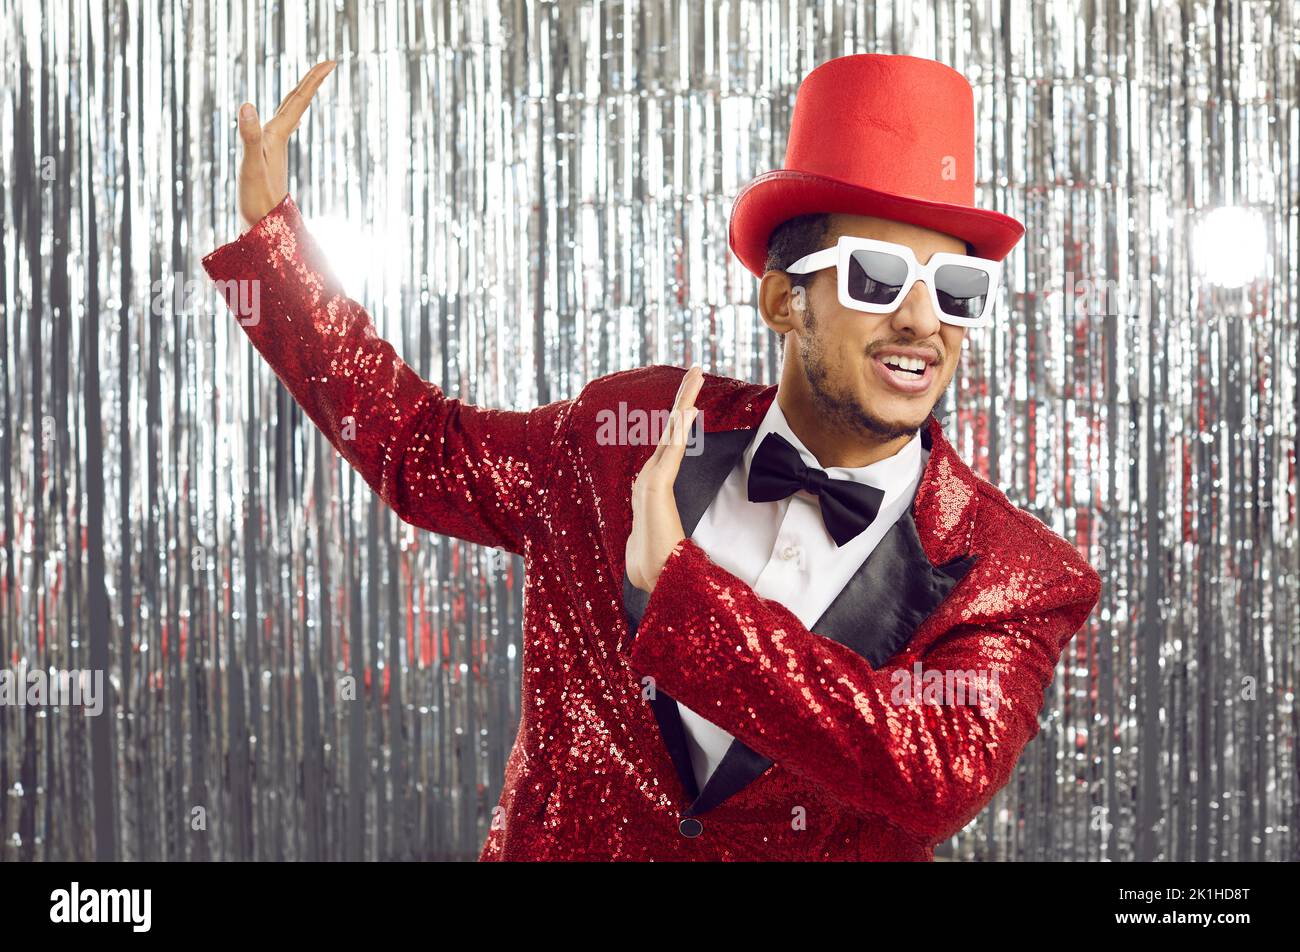 Happy funny black man in a red sequin jacket, top hat and sunglasses dancing at a party Stock Photo